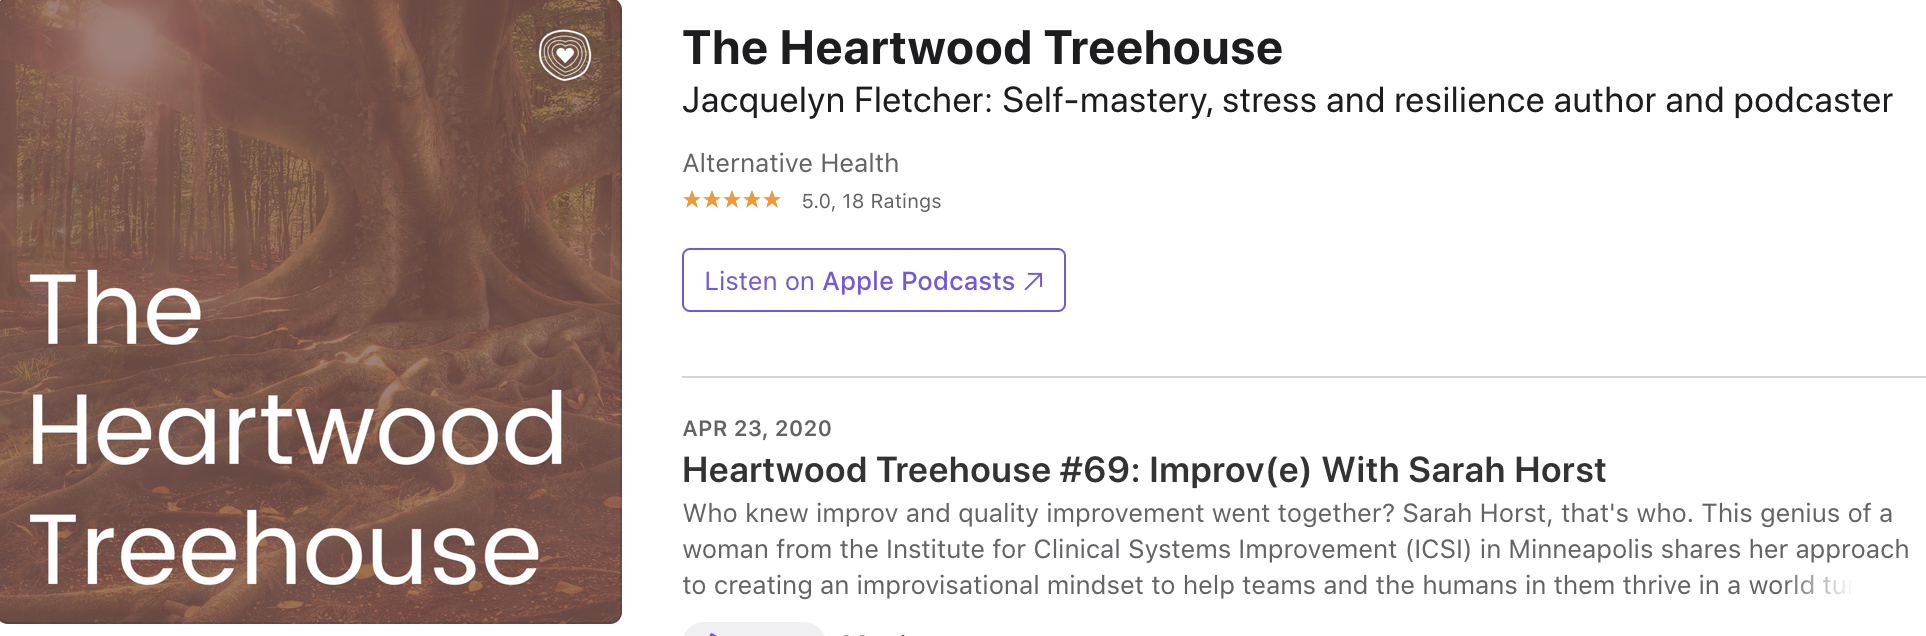 The Heartwood Treehouse